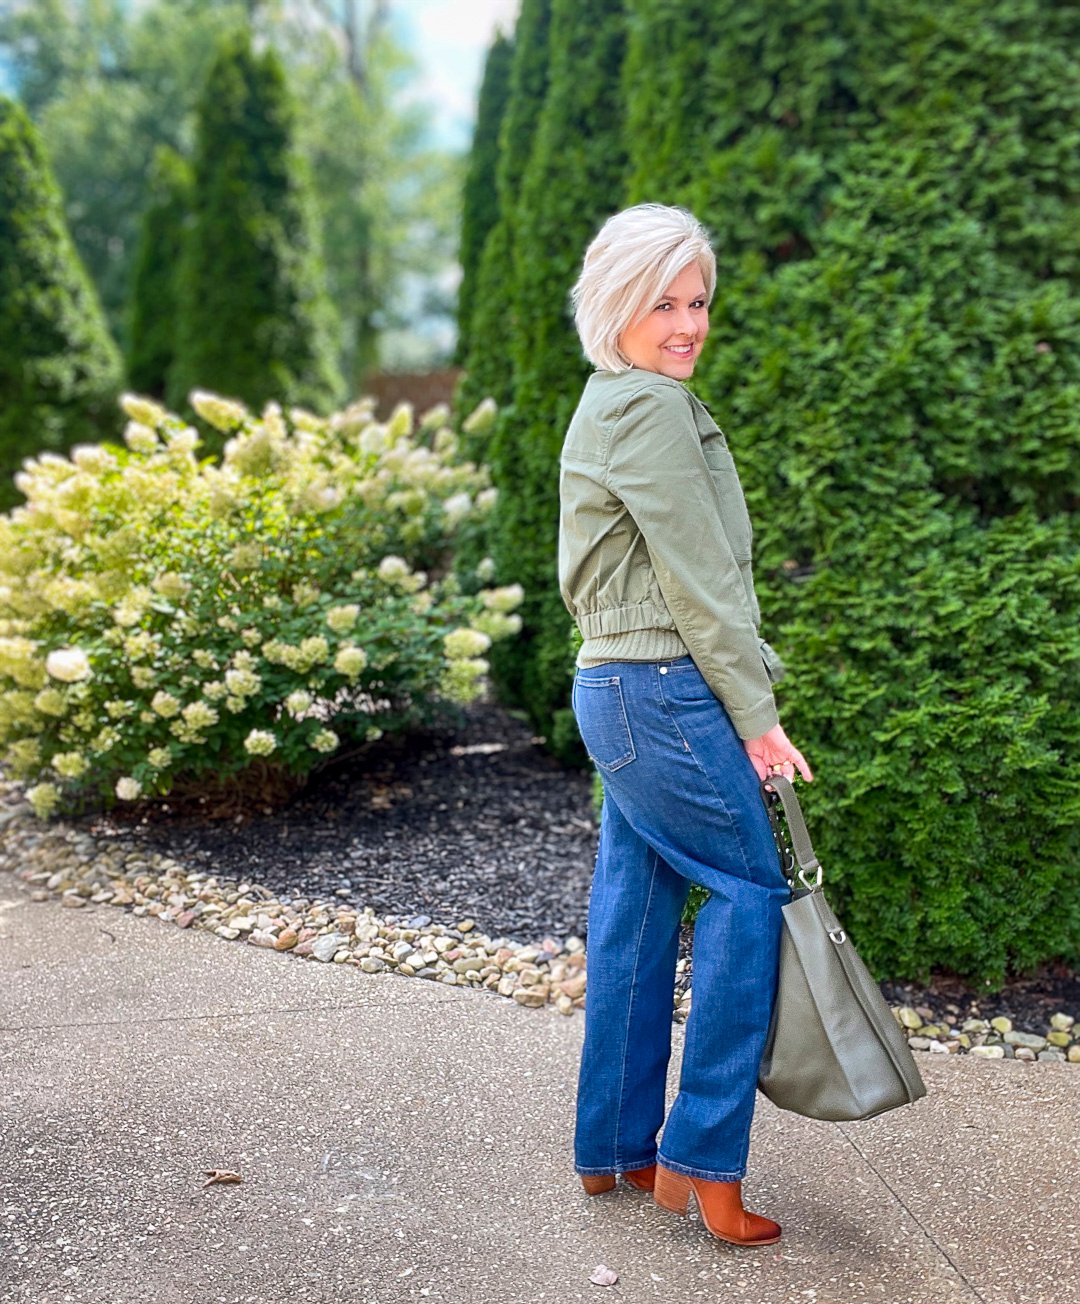 Over 40 Fashion Blogger, Tania Stephens is wearing an olive green jacket and sweater tank from Banana Republic11